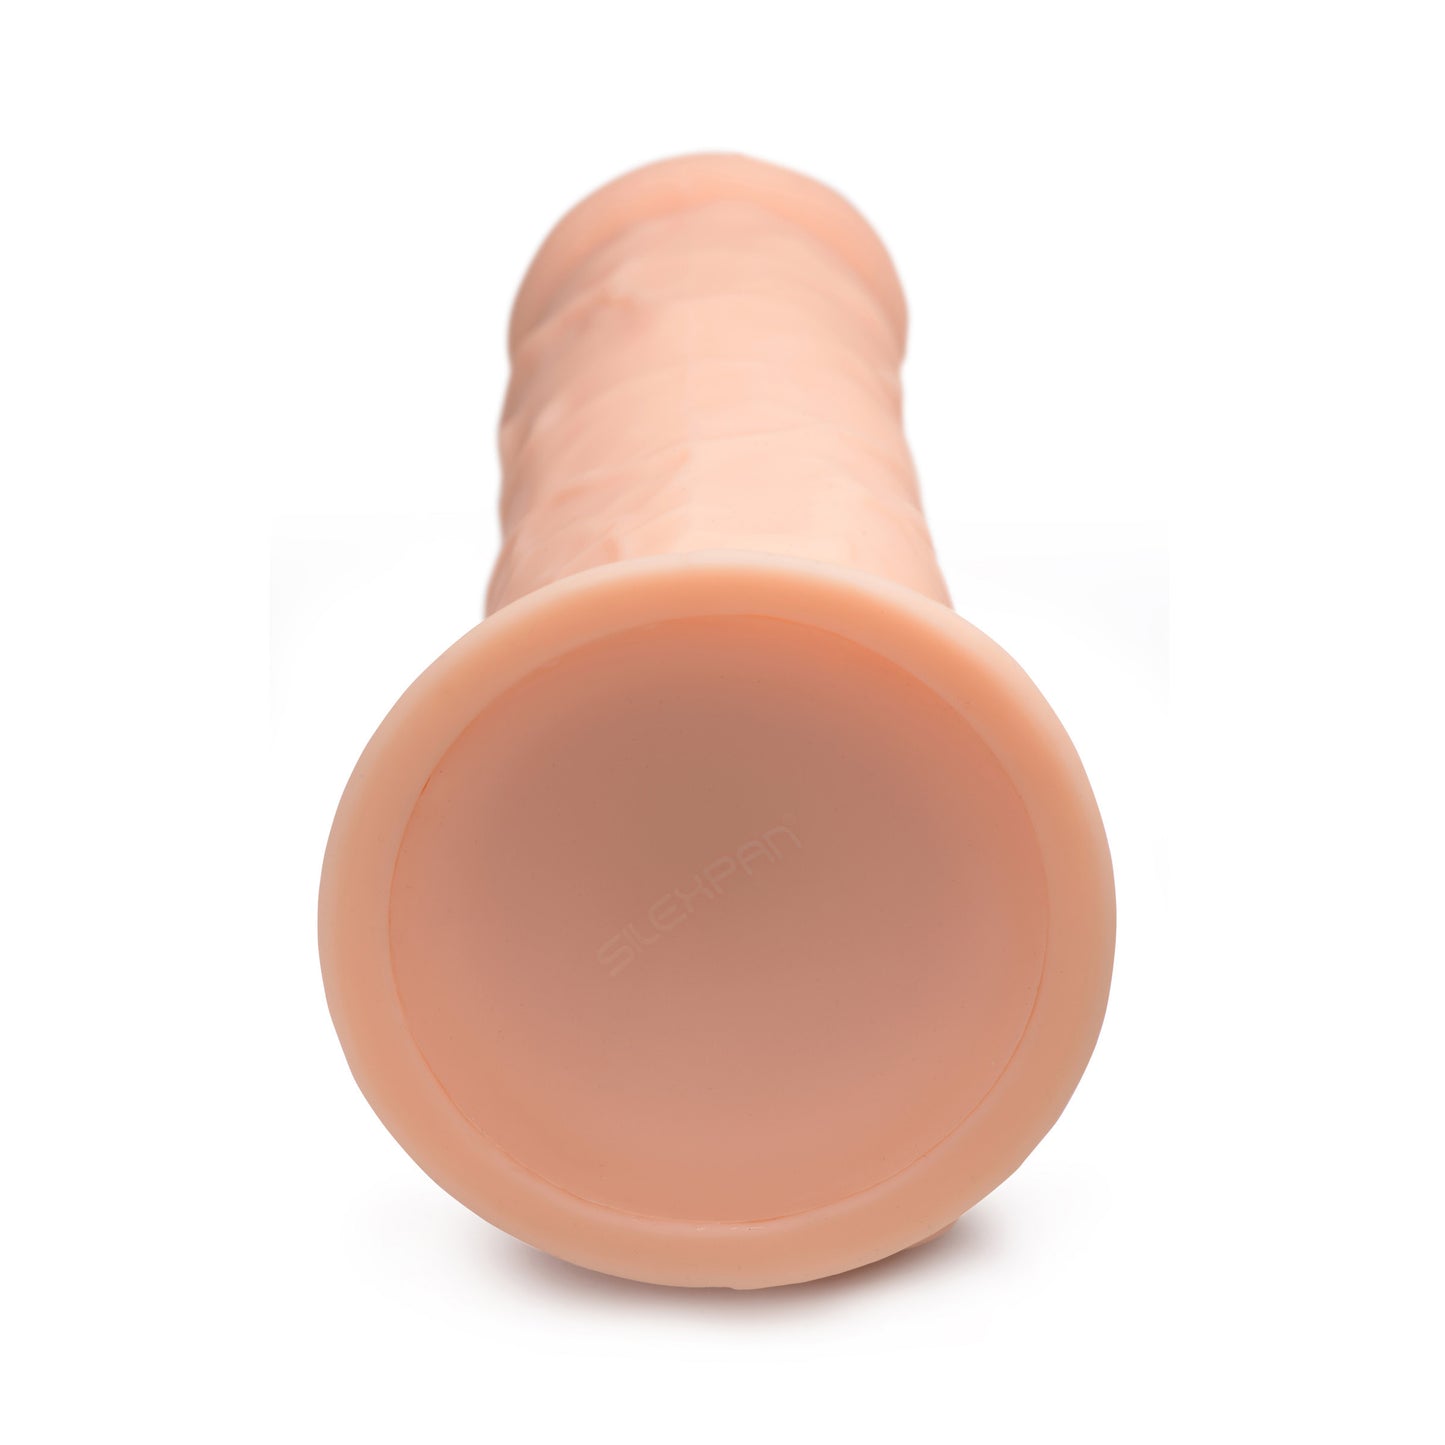 Silexpan Light Hypoallergenic Silicone Dildo with Balls - 8 Inch - UABDSM